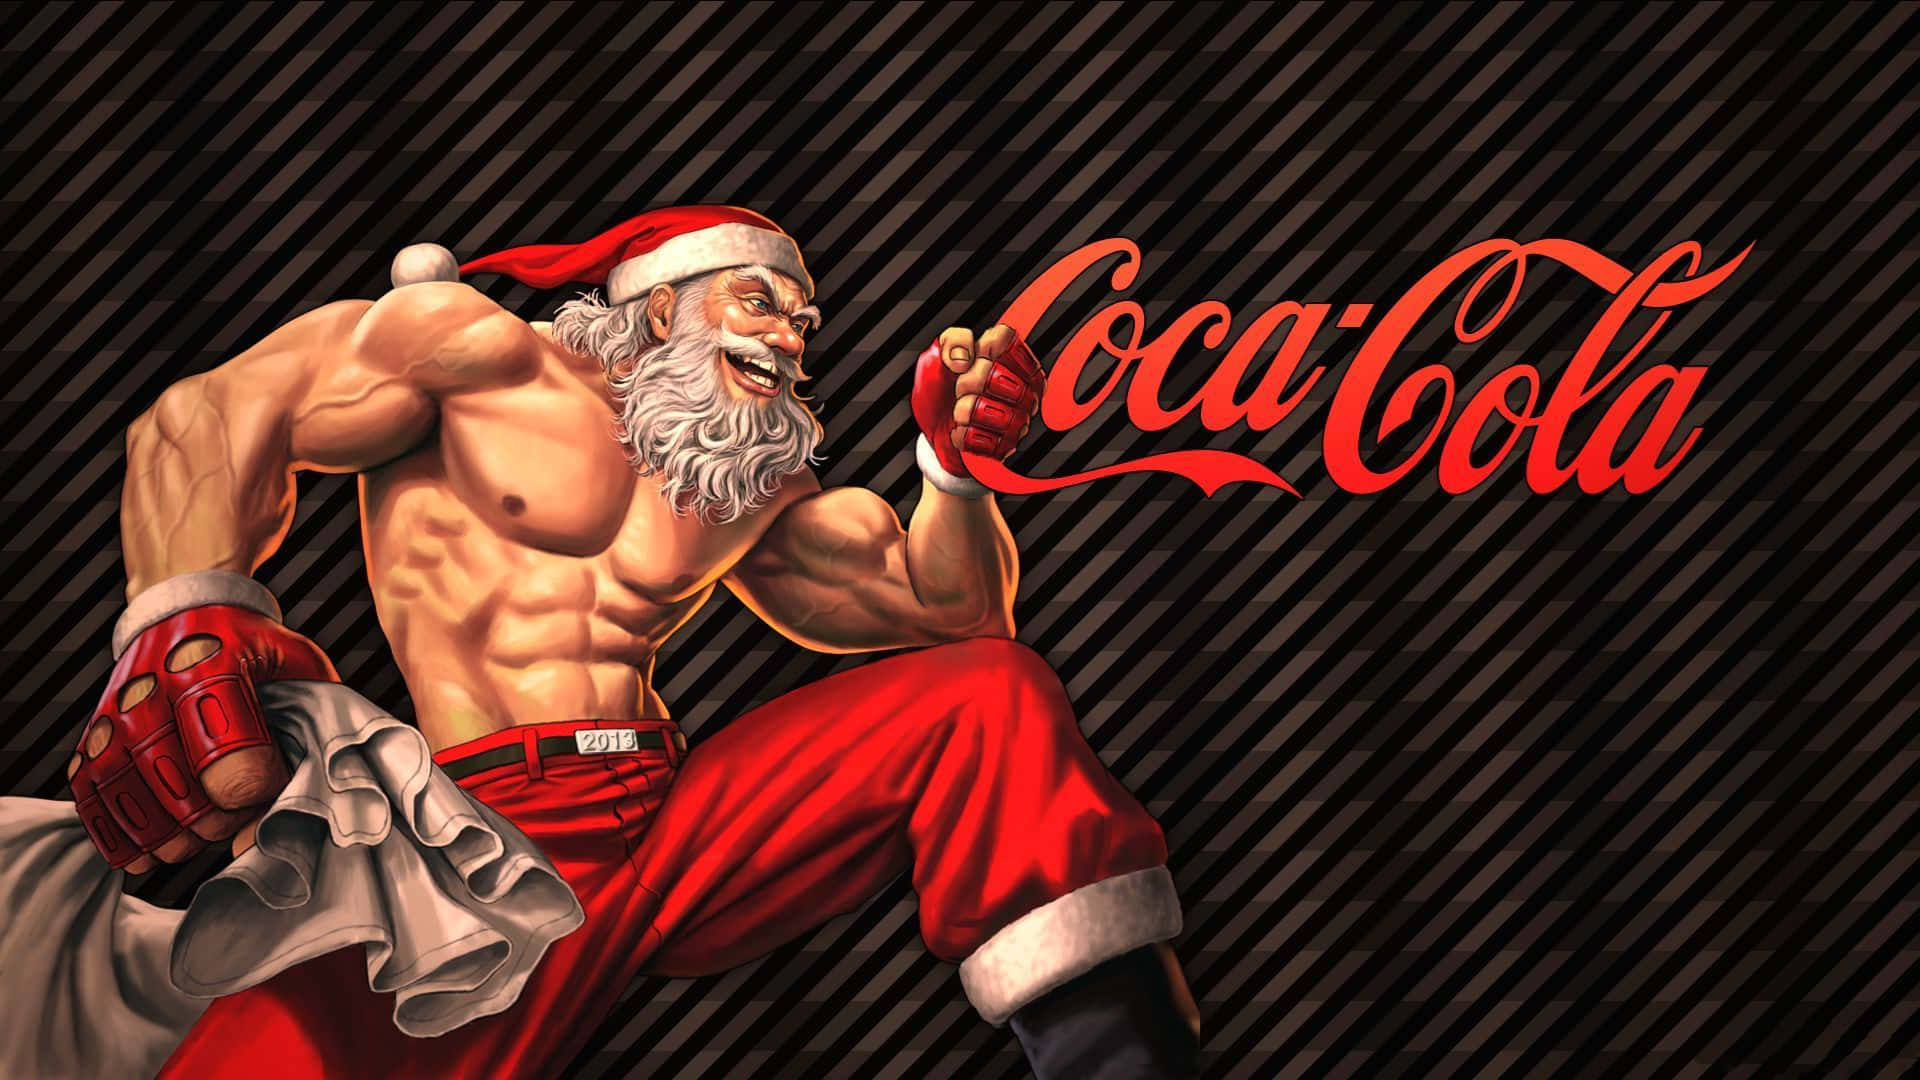 A Man In A Red Suit Is Holding A Coca Cola Bottle